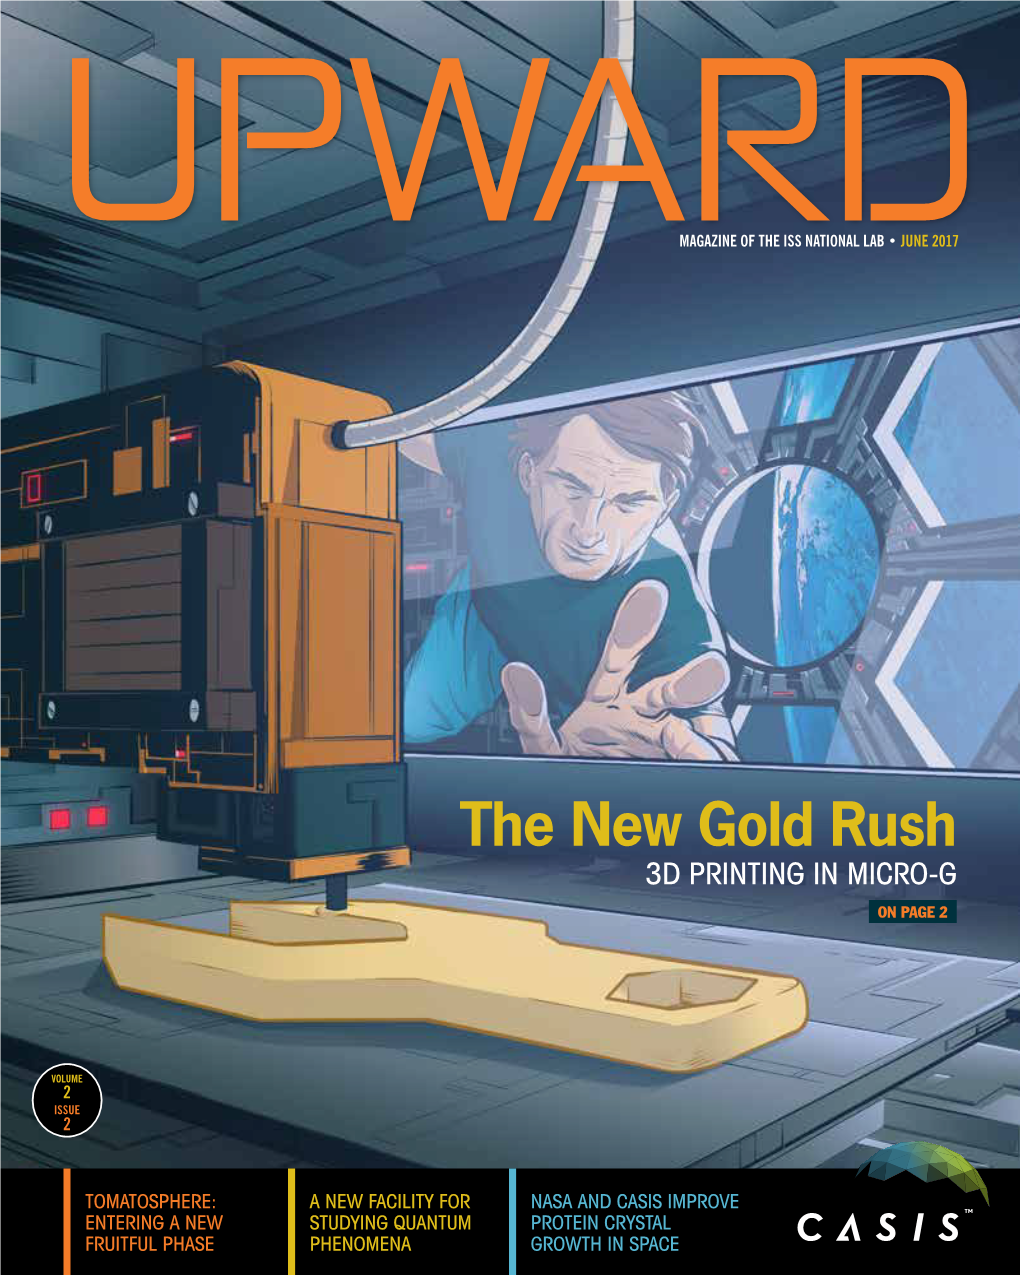 The New Gold Rush 3D PRINTING in MICRO-G on PAGE 2